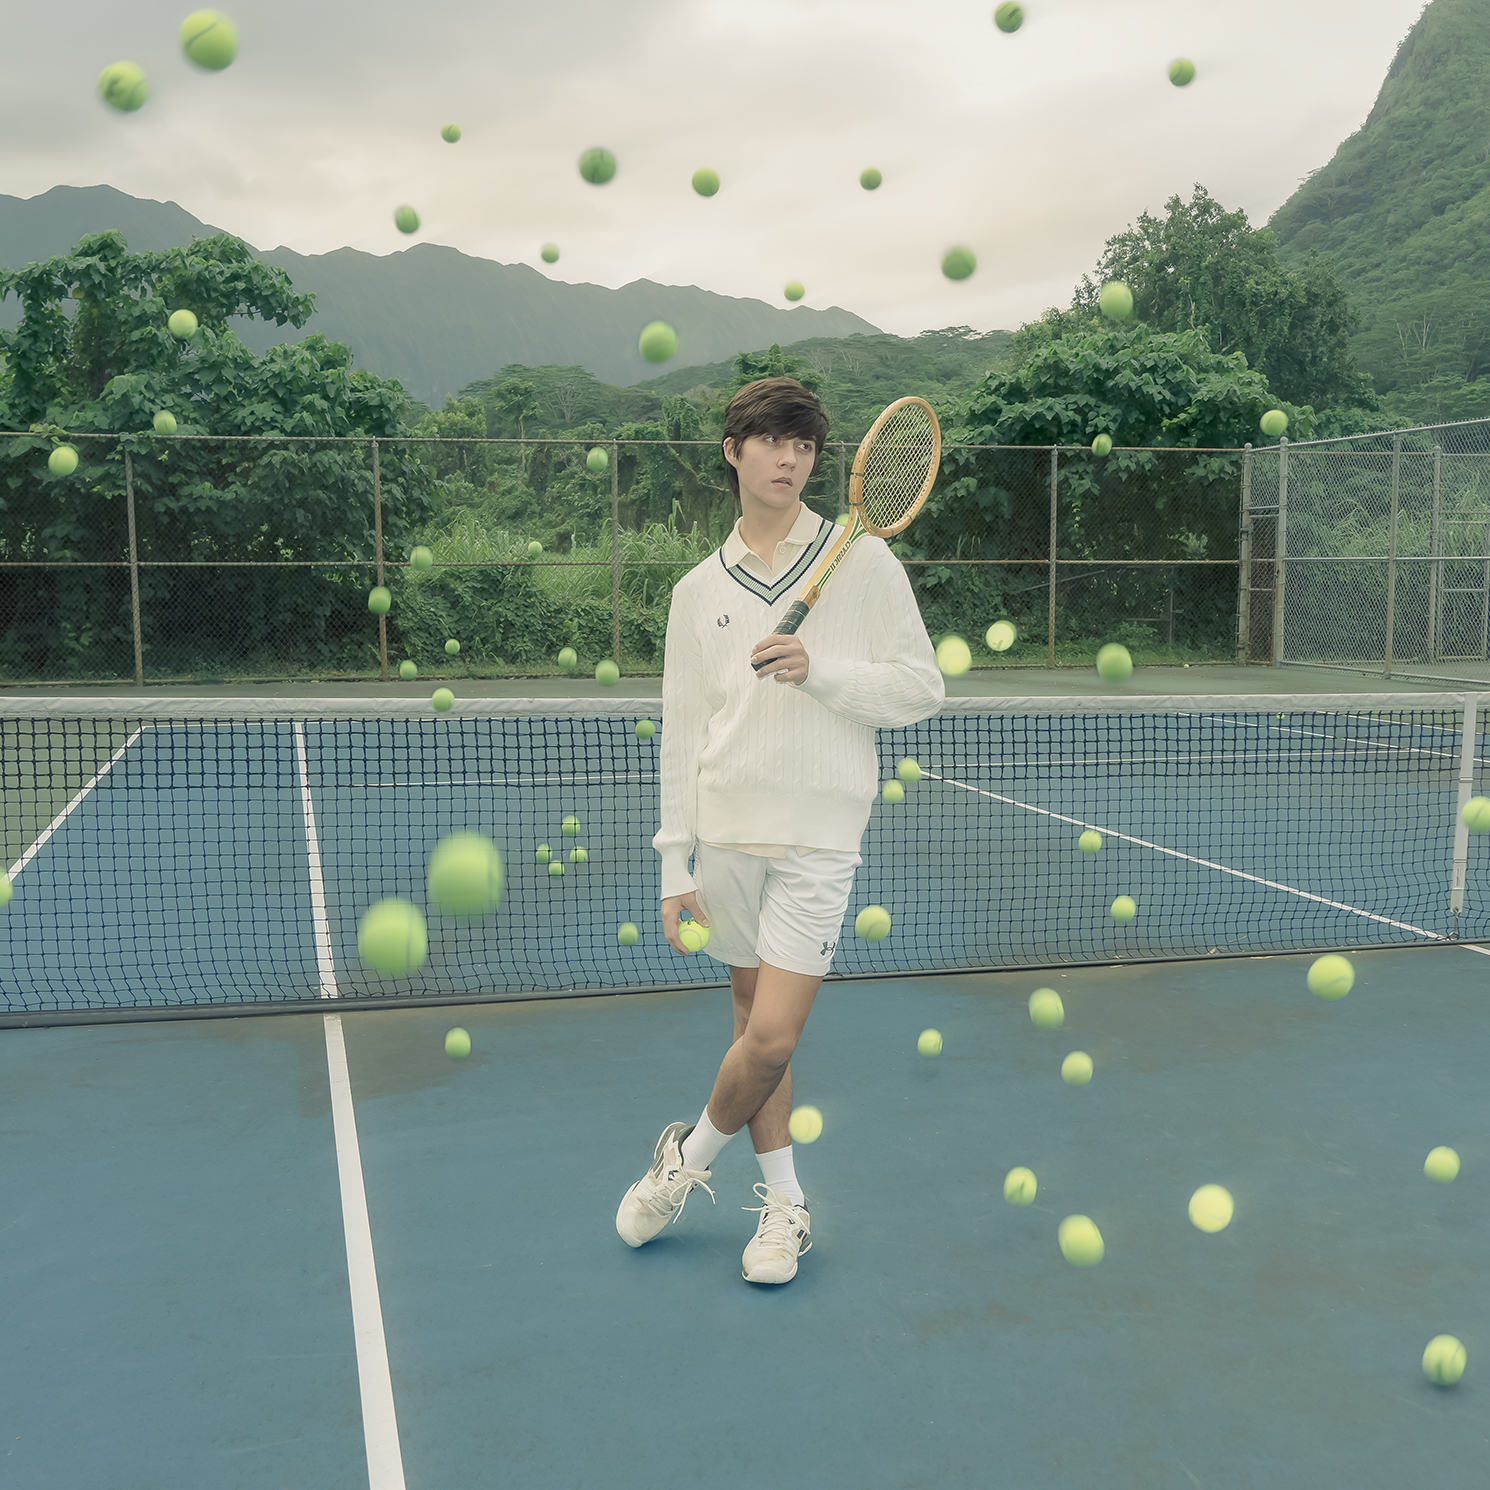 Photograph of a boy holding a tennis racket in a blue tennis court surrounded by several floating tennis balls. There are trees and mountains in the background.